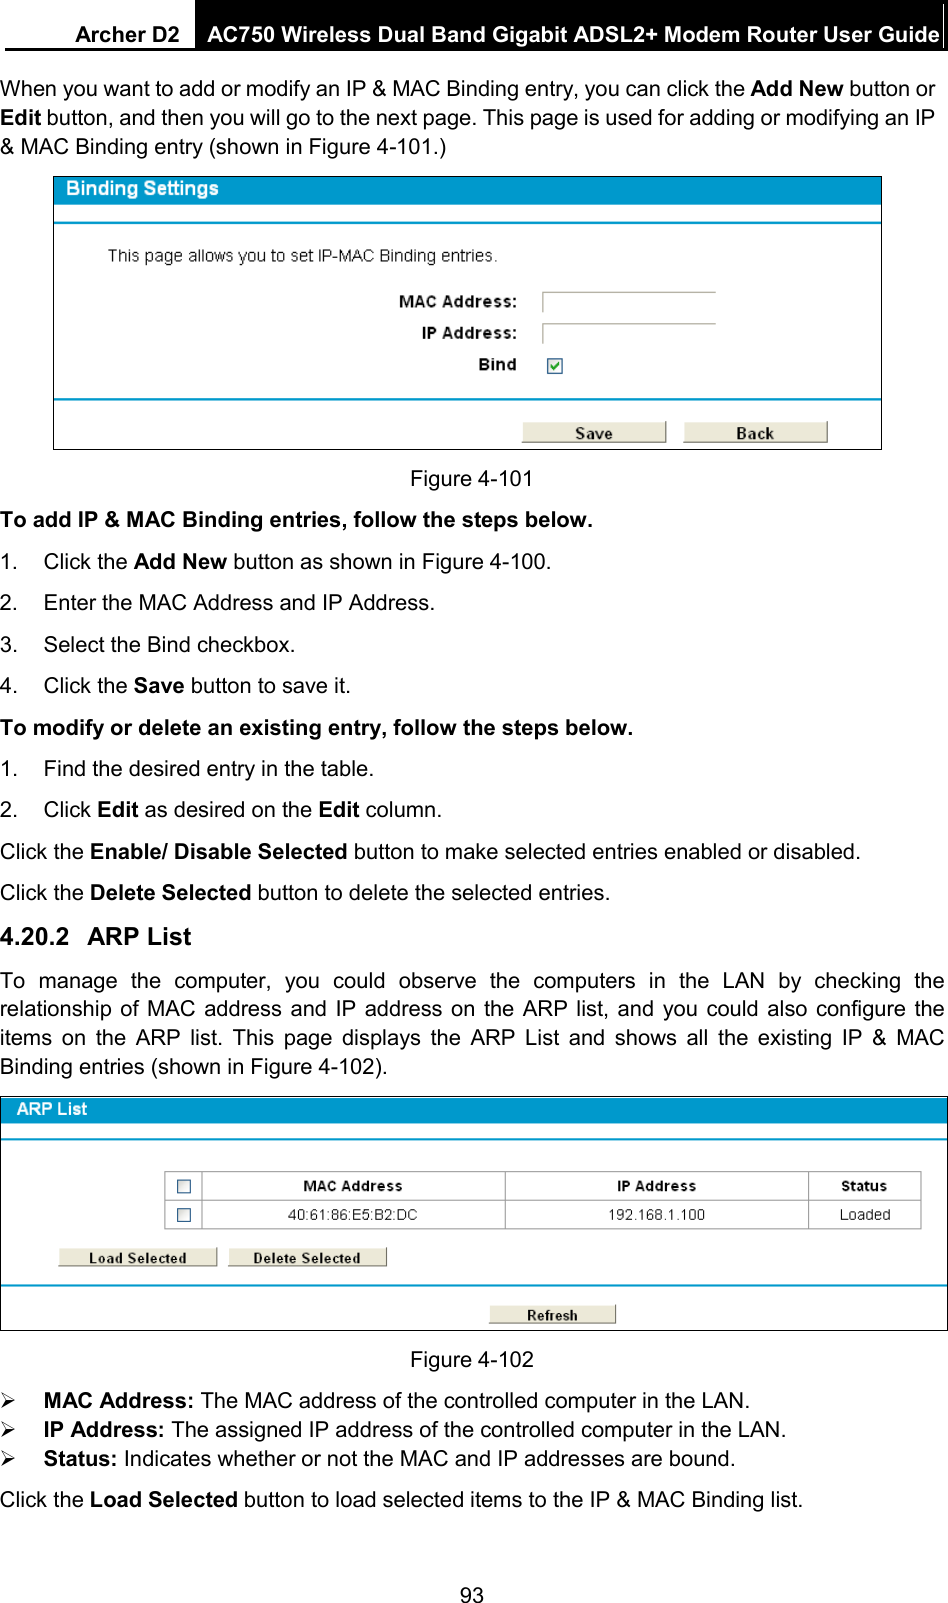 Archer D2 AC750 Wireless Dual Band Gigabit ADSL2+ Modem Router User Guide  When you want to add or modify an IP &amp; MAC Binding entry, you can click the Add New button or Edit button, and then you will go to the next page. This page is used for adding or modifying an IP &amp; MAC Binding entry (shown in Figure 4-101.)  Figure 4-101   To add IP &amp; MAC Binding entries, follow the steps below. 1. Click the Add New button as shown in Figure 4-100.   2. Enter the MAC Address and IP Address. 3. Select the Bind checkbox.   4. Click the Save button to save it. To modify or delete an existing entry, follow the steps below. 1. Find the desired entry in the table.   2. Click Edit as desired on the Edit column.   Click the Enable/ Disable Selected button to make selected entries enabled or disabled. Click the Delete Selected button to delete the selected entries. 4.20.2 ARP List To manage the computer, you could observe the computers in the LAN by checking the relationship of MAC address and IP address on the ARP list, and you could also configure the items on the ARP list. This page displays the ARP List and  shows all the existing IP &amp; MAC Binding entries (shown in Figure 4-102).  Figure 4-102  MAC Address: The MAC address of the controlled computer in the LAN.    IP Address: The assigned IP address of the controlled computer in the LAN.    Status: Indicates whether or not the MAC and IP addresses are bound. Click the Load Selected button to load selected items to the IP &amp; MAC Binding list. 93 